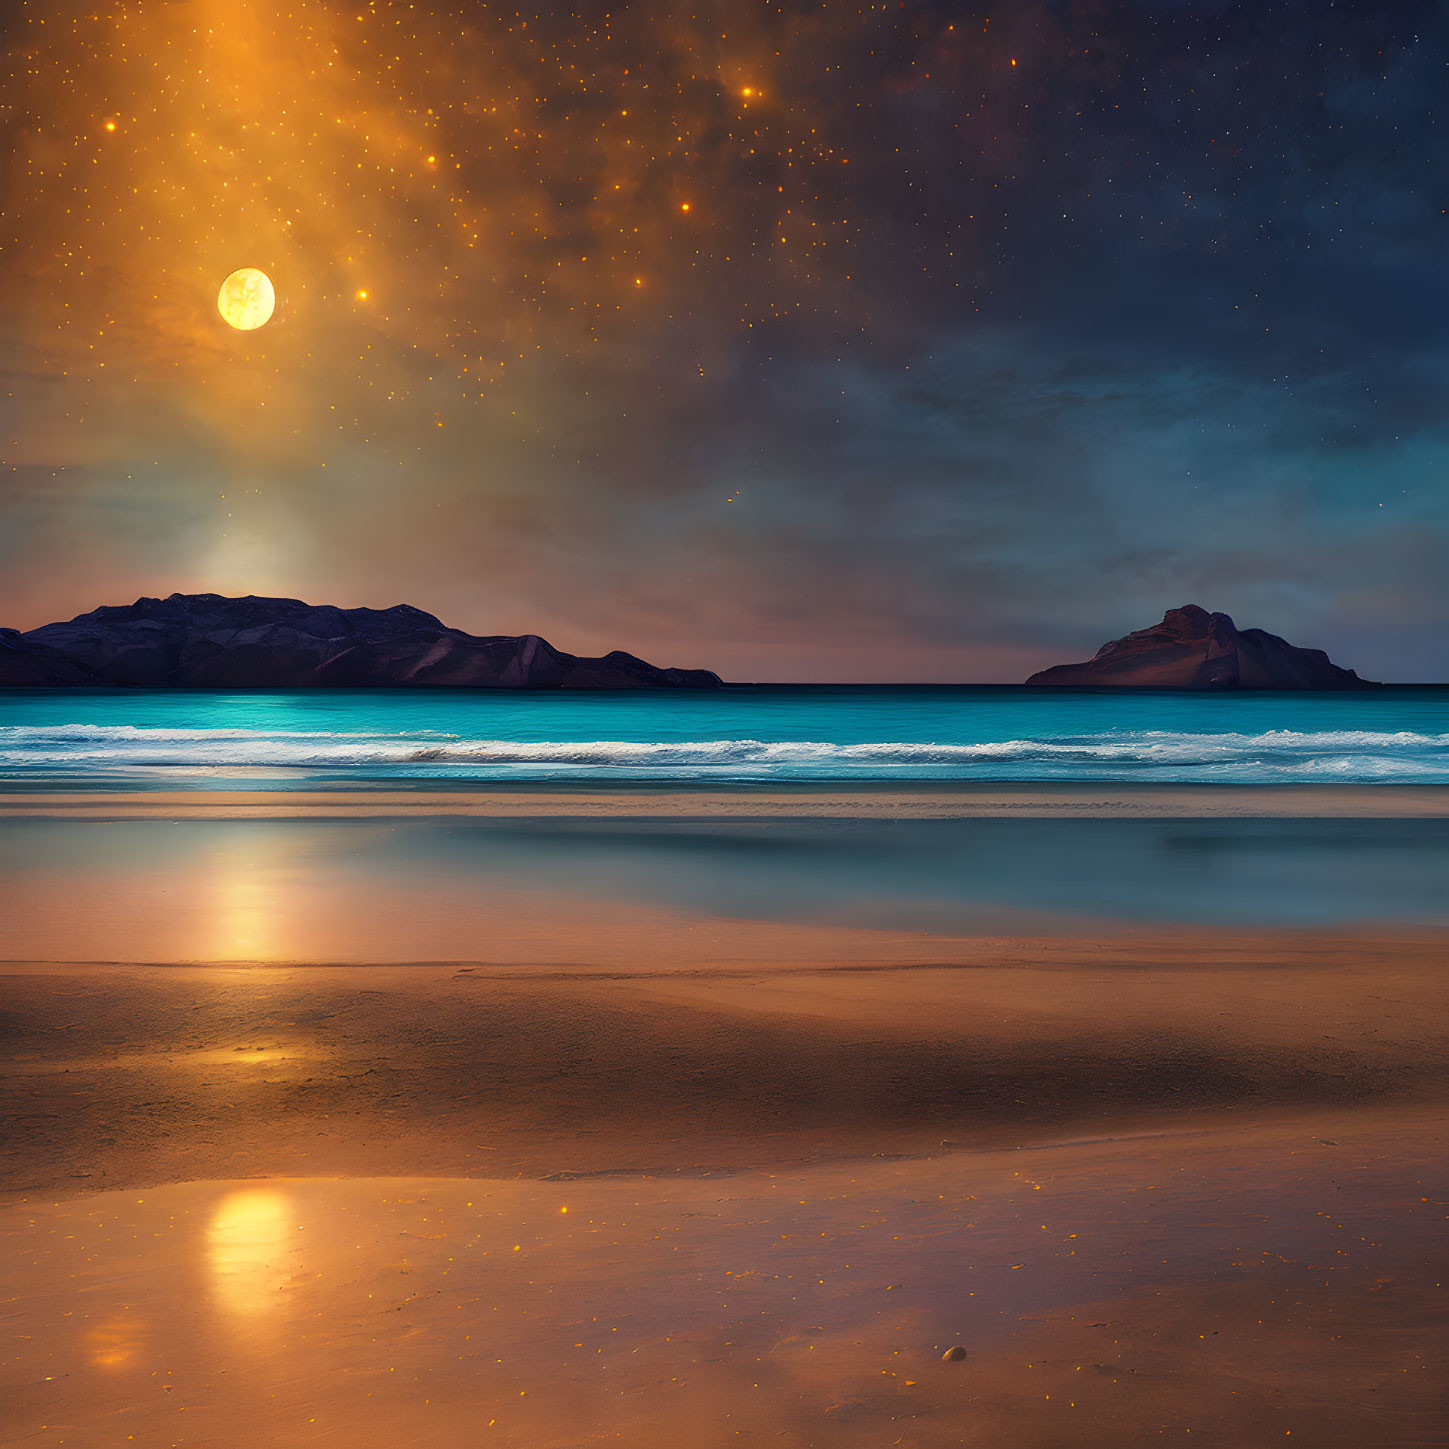 Twilight beach scene with glowing moon, stars, and distant mountains